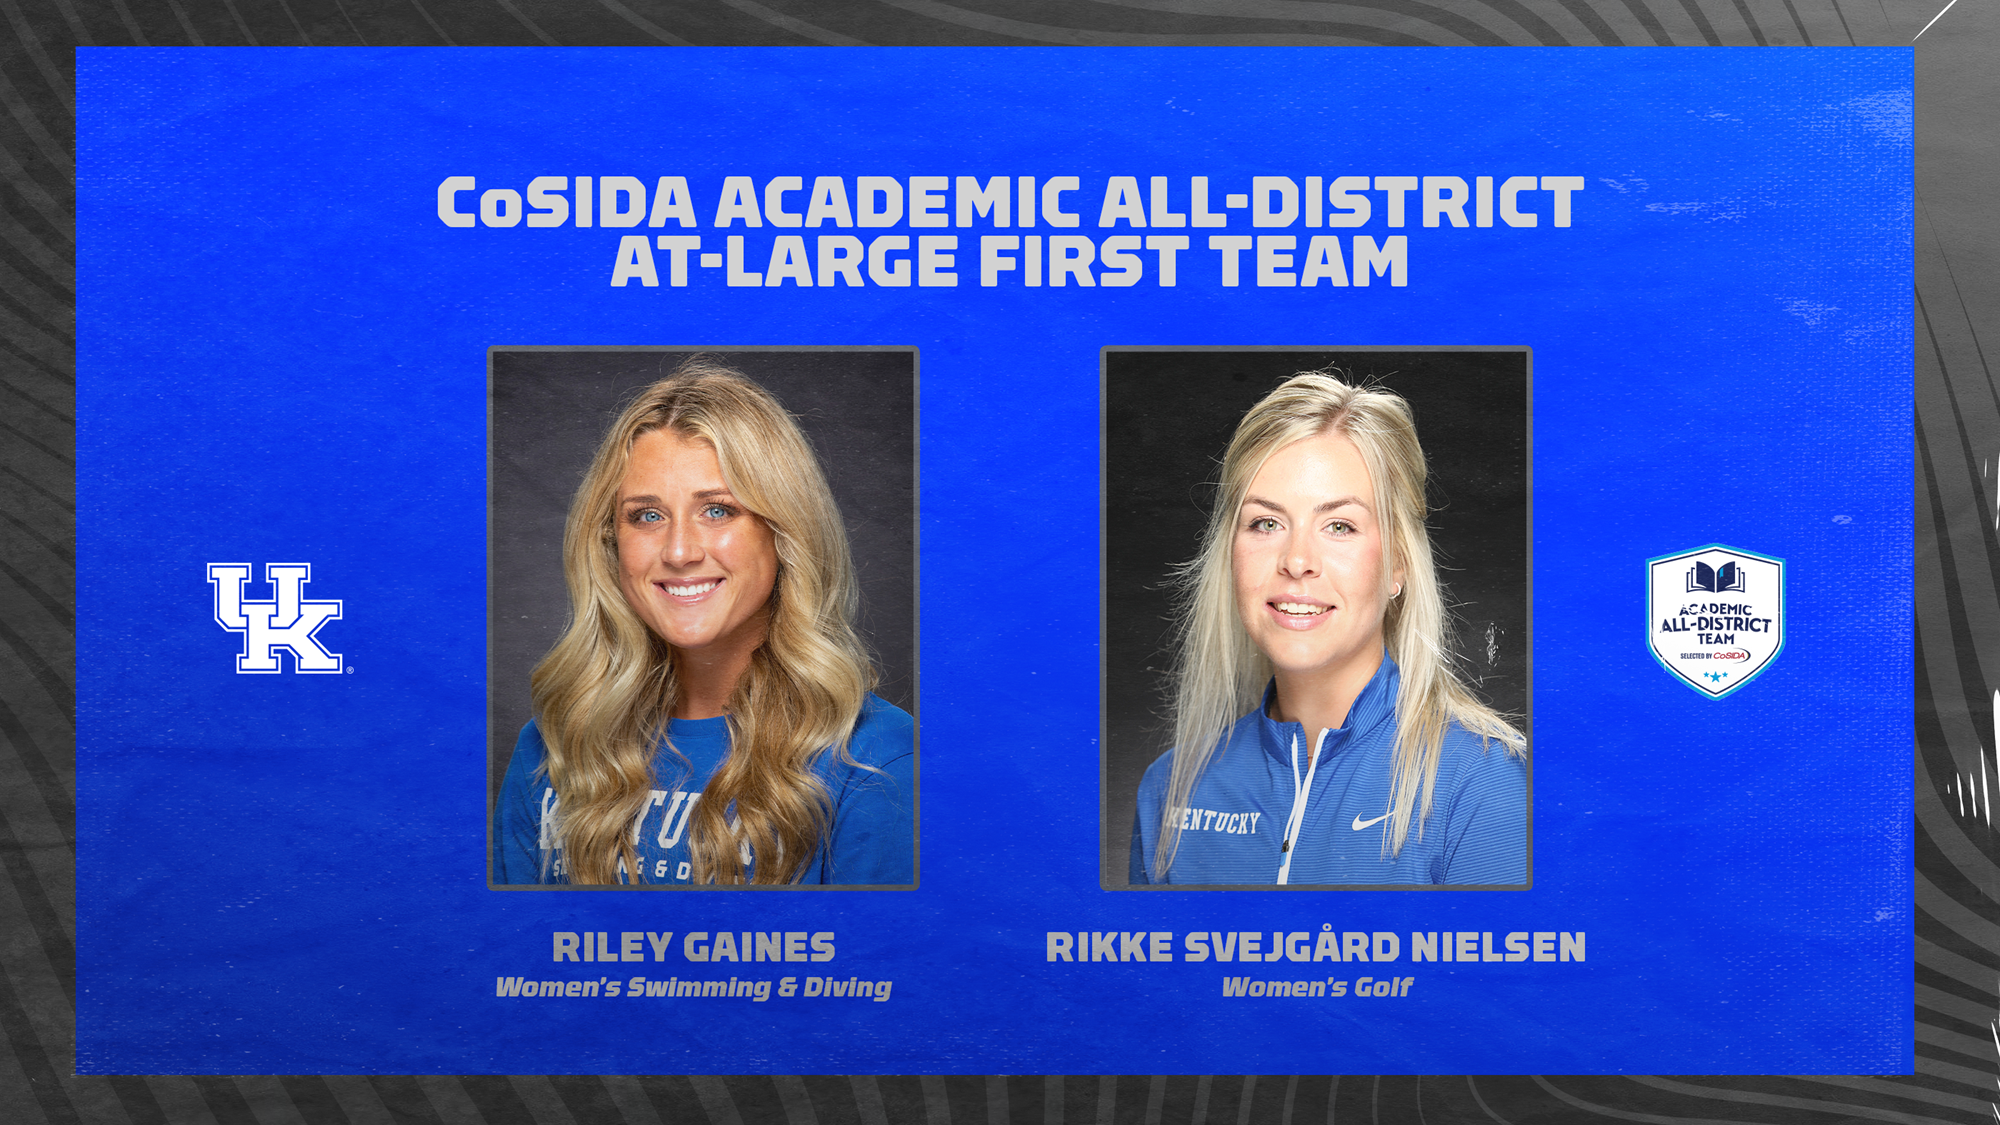 Gaines, Svejgård Nielsen Tabbed to CoSIDA Academic All-District At-Large First Team